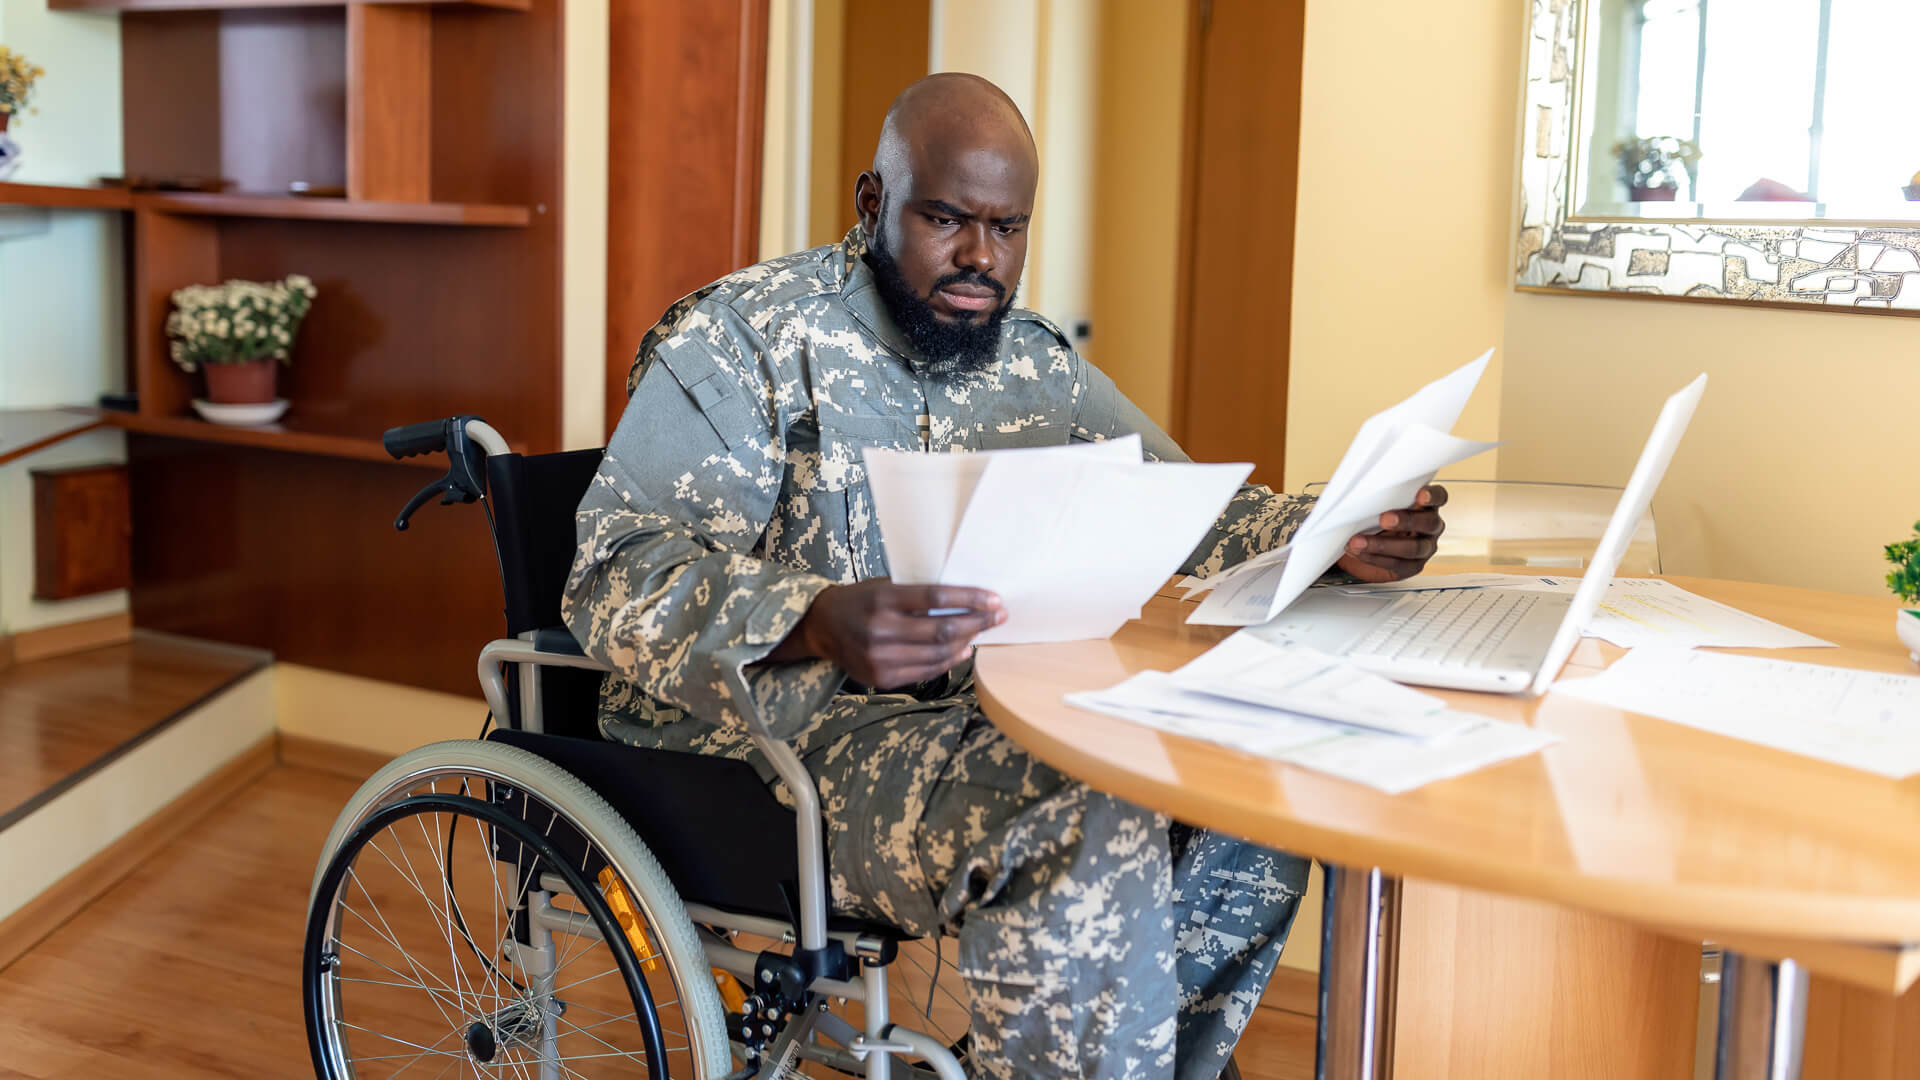 10-major-tax-credits-and-deductions-for-disabled-tax-filers